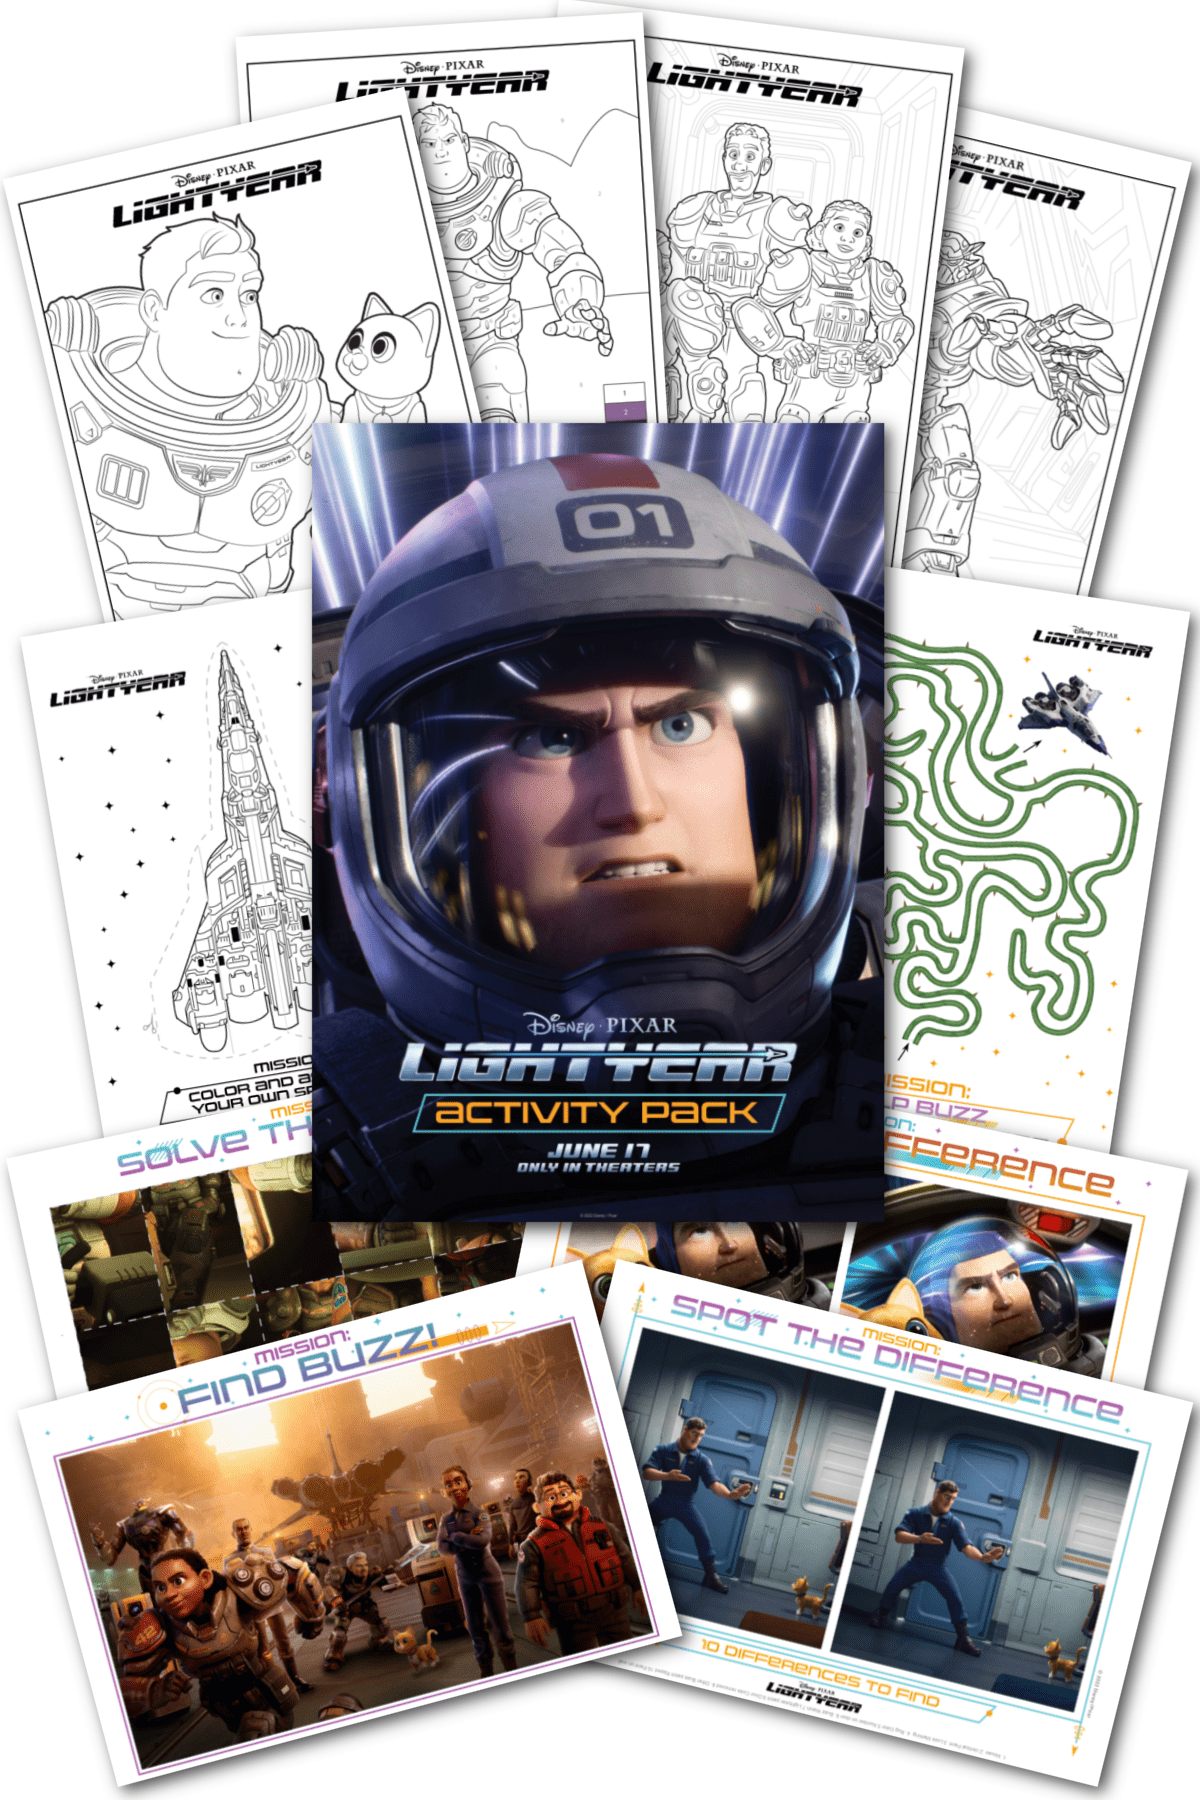 Lightyear Activity Pack Collage 2